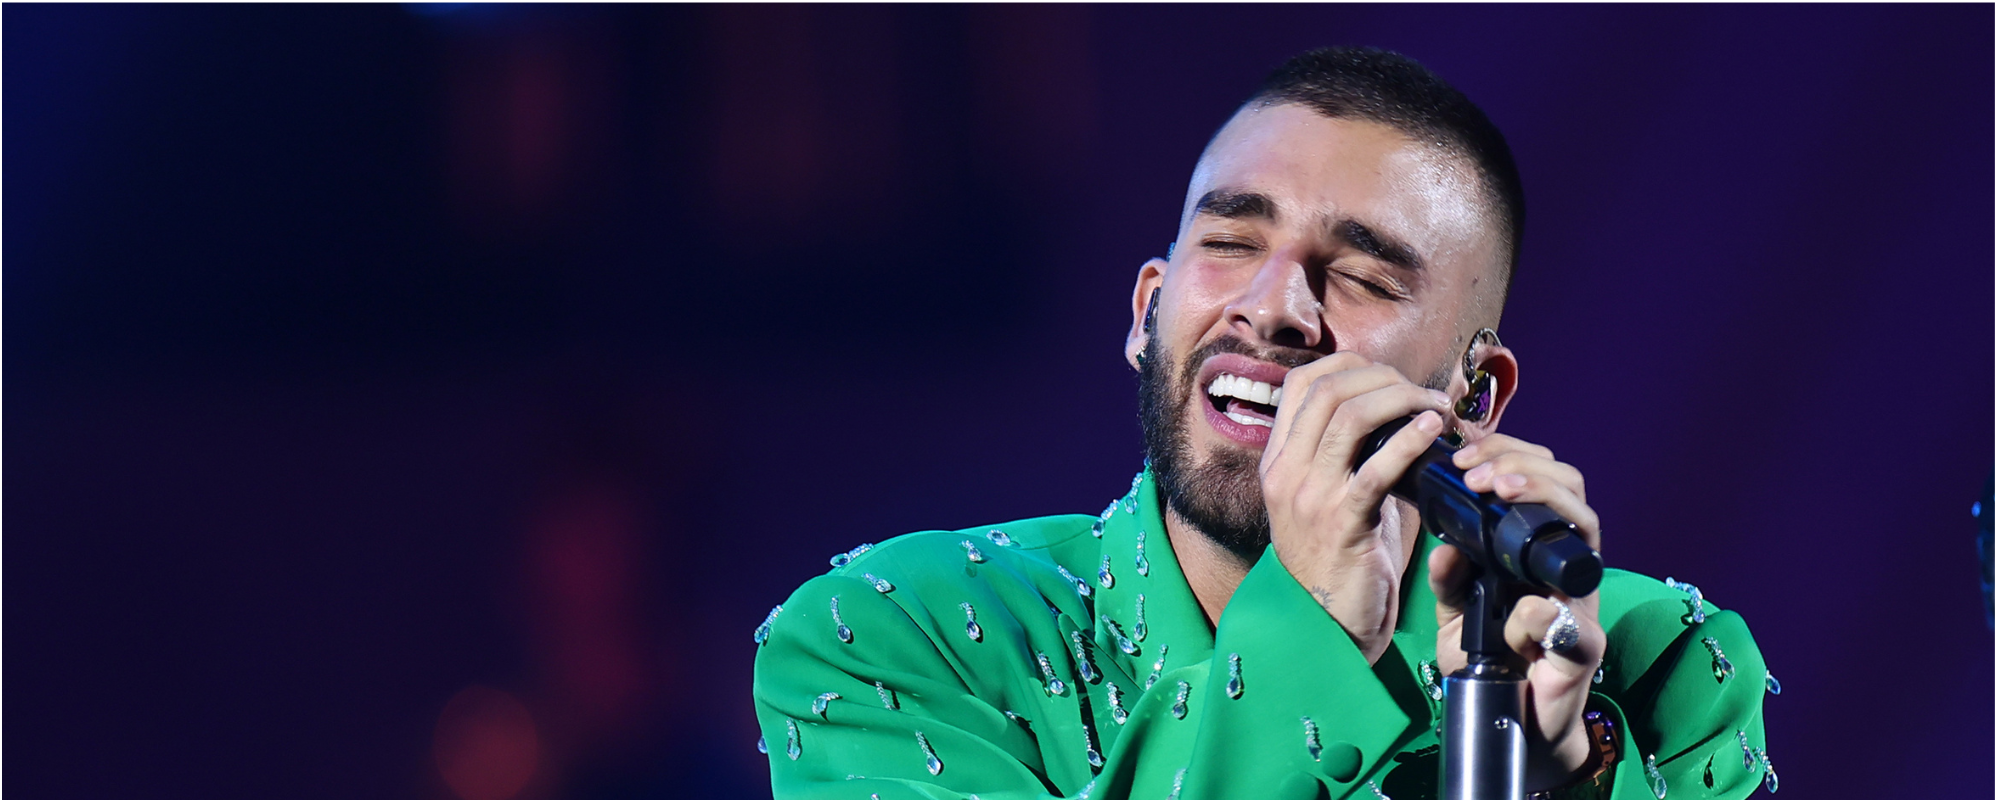 Exclusive: Manuel Turizo is “Grateful” to Perform on ‘Christmas in Rockefeller Center’